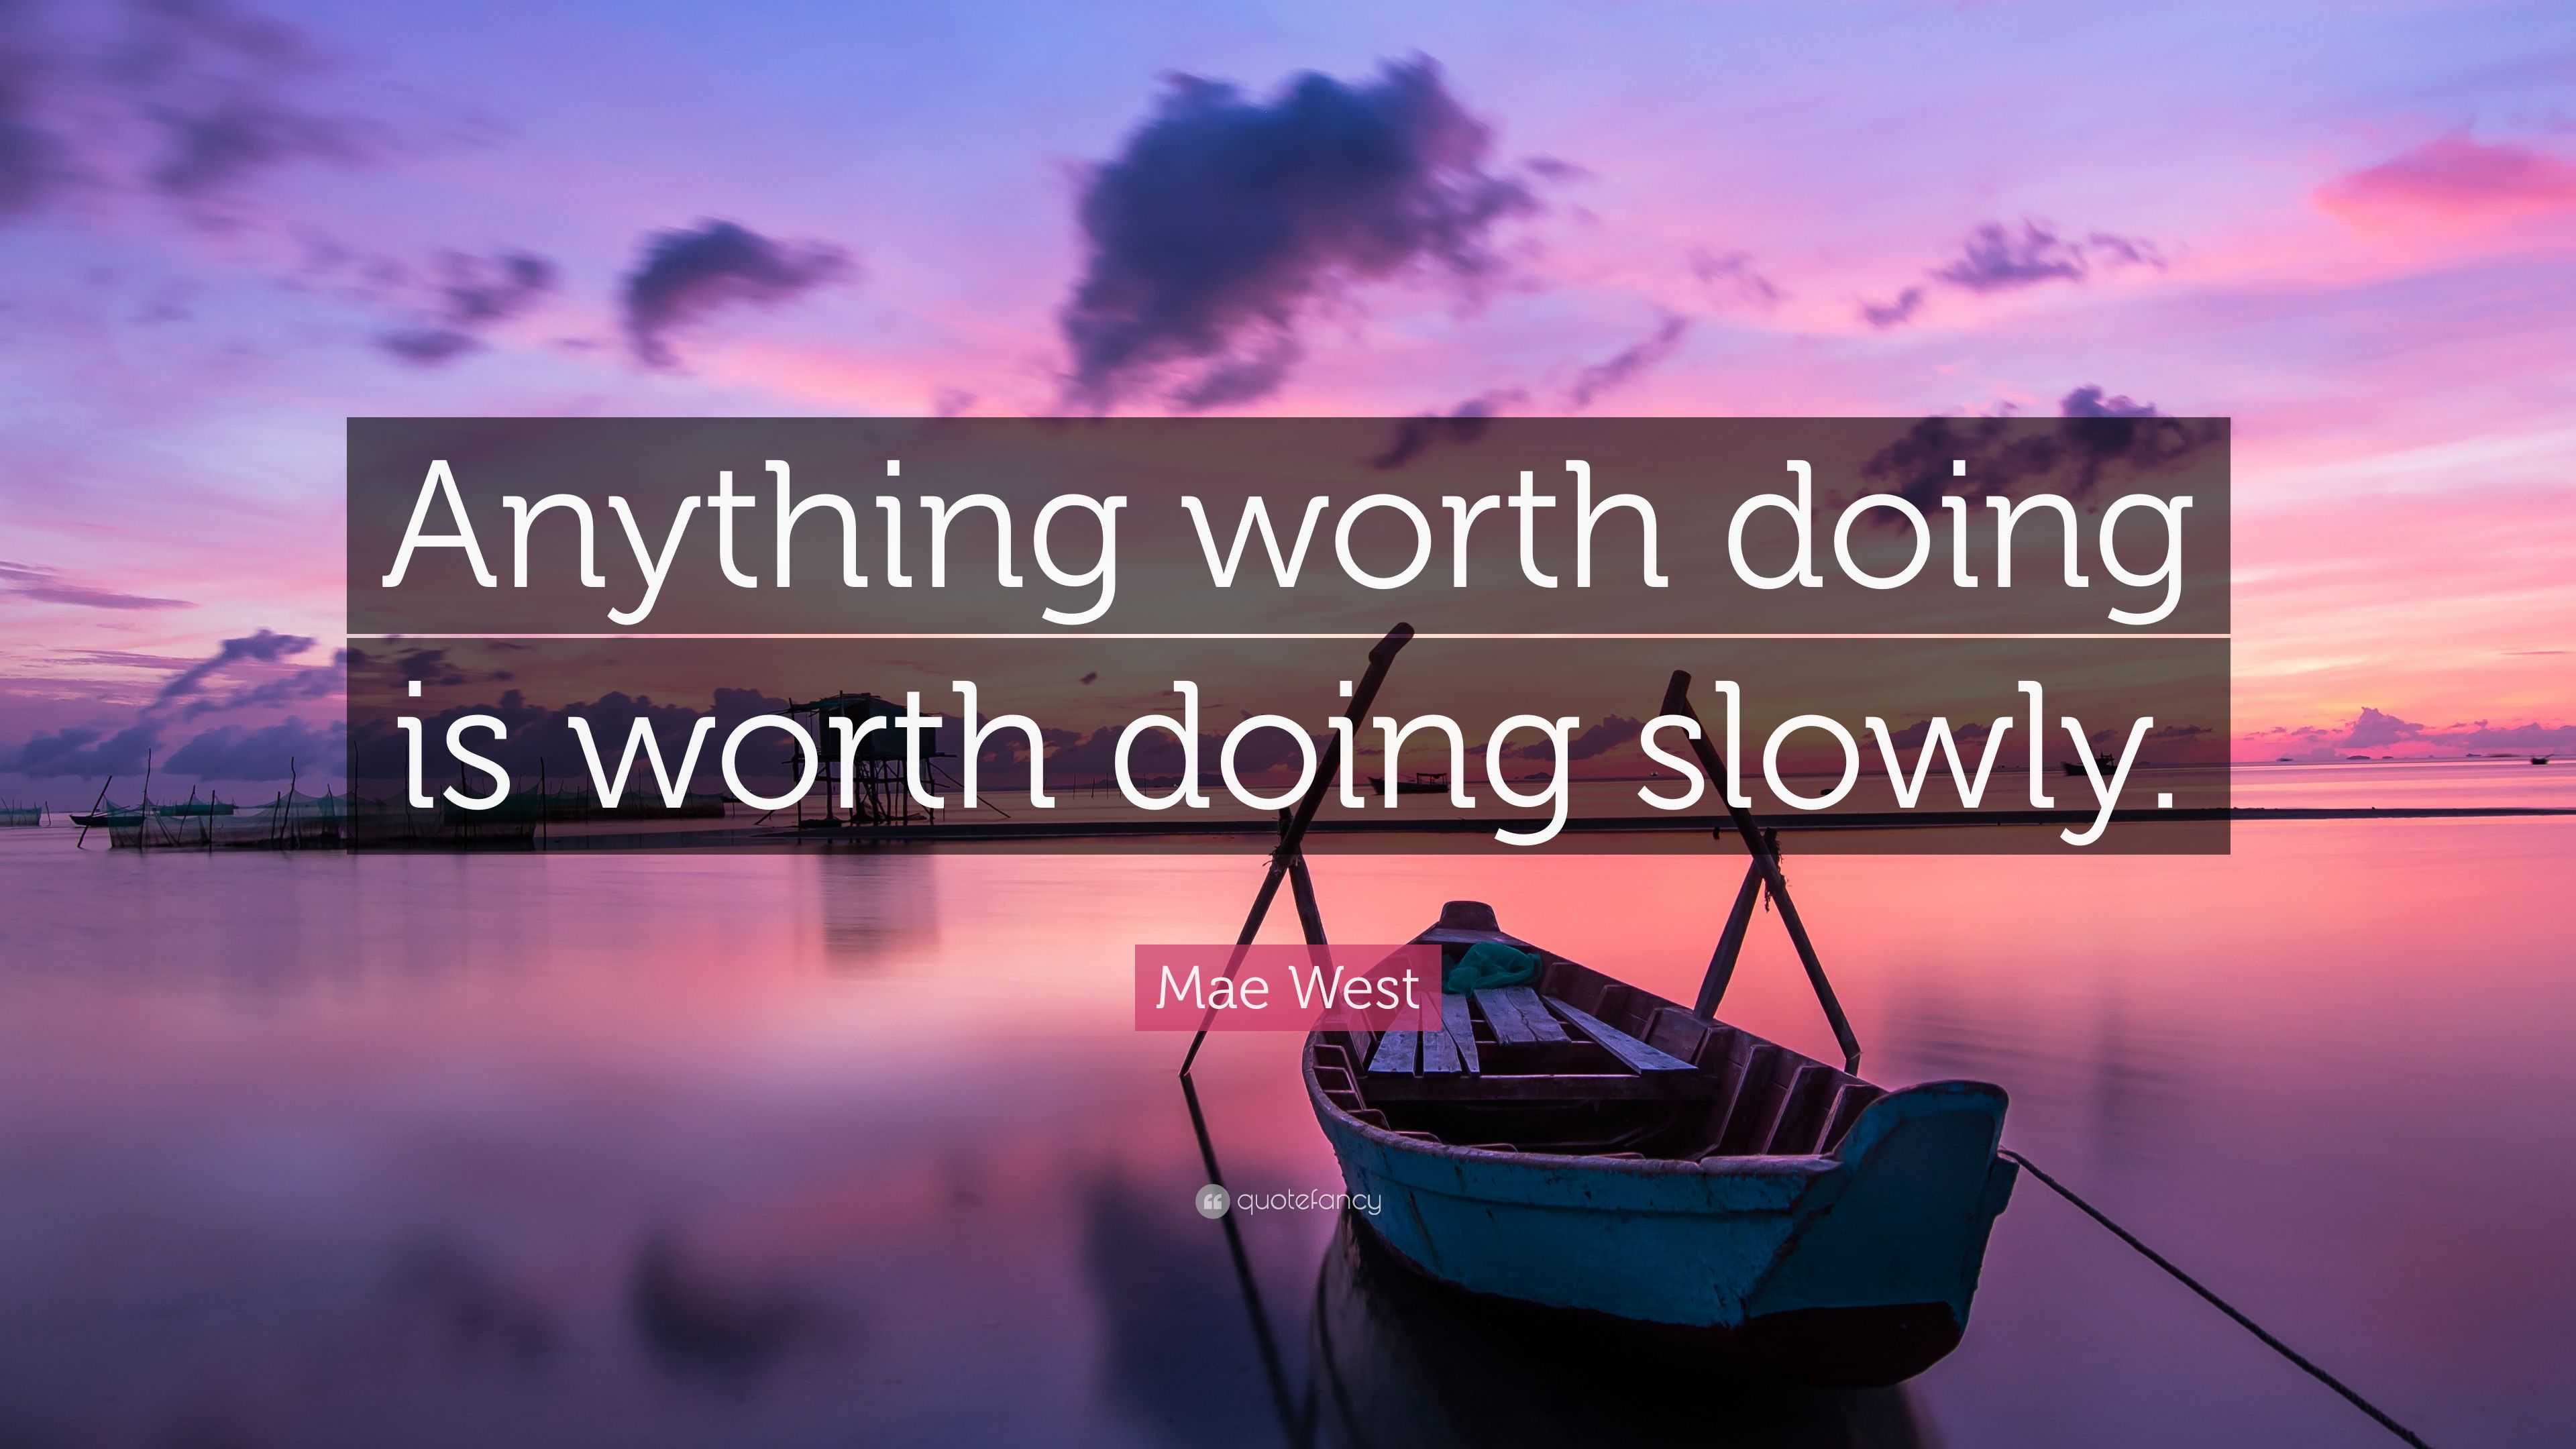 Mae West Quote: “Anything worth doing is worth doing slowly.” ways to renew yourself